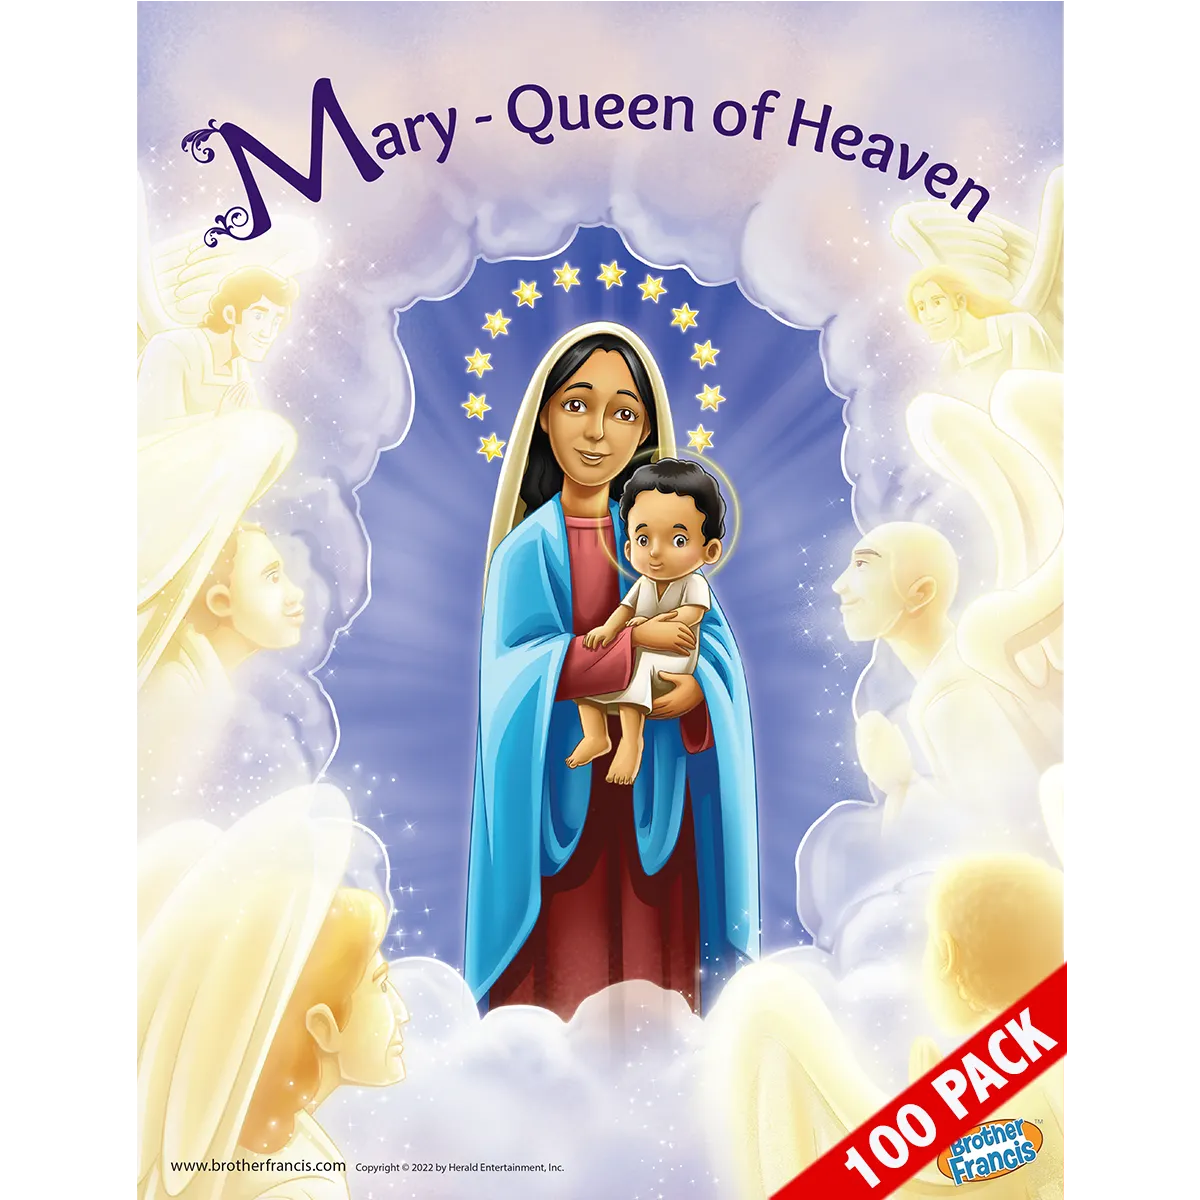 100 Pack of Brother Francis Mini Poster - Mary - Queen of Heaven